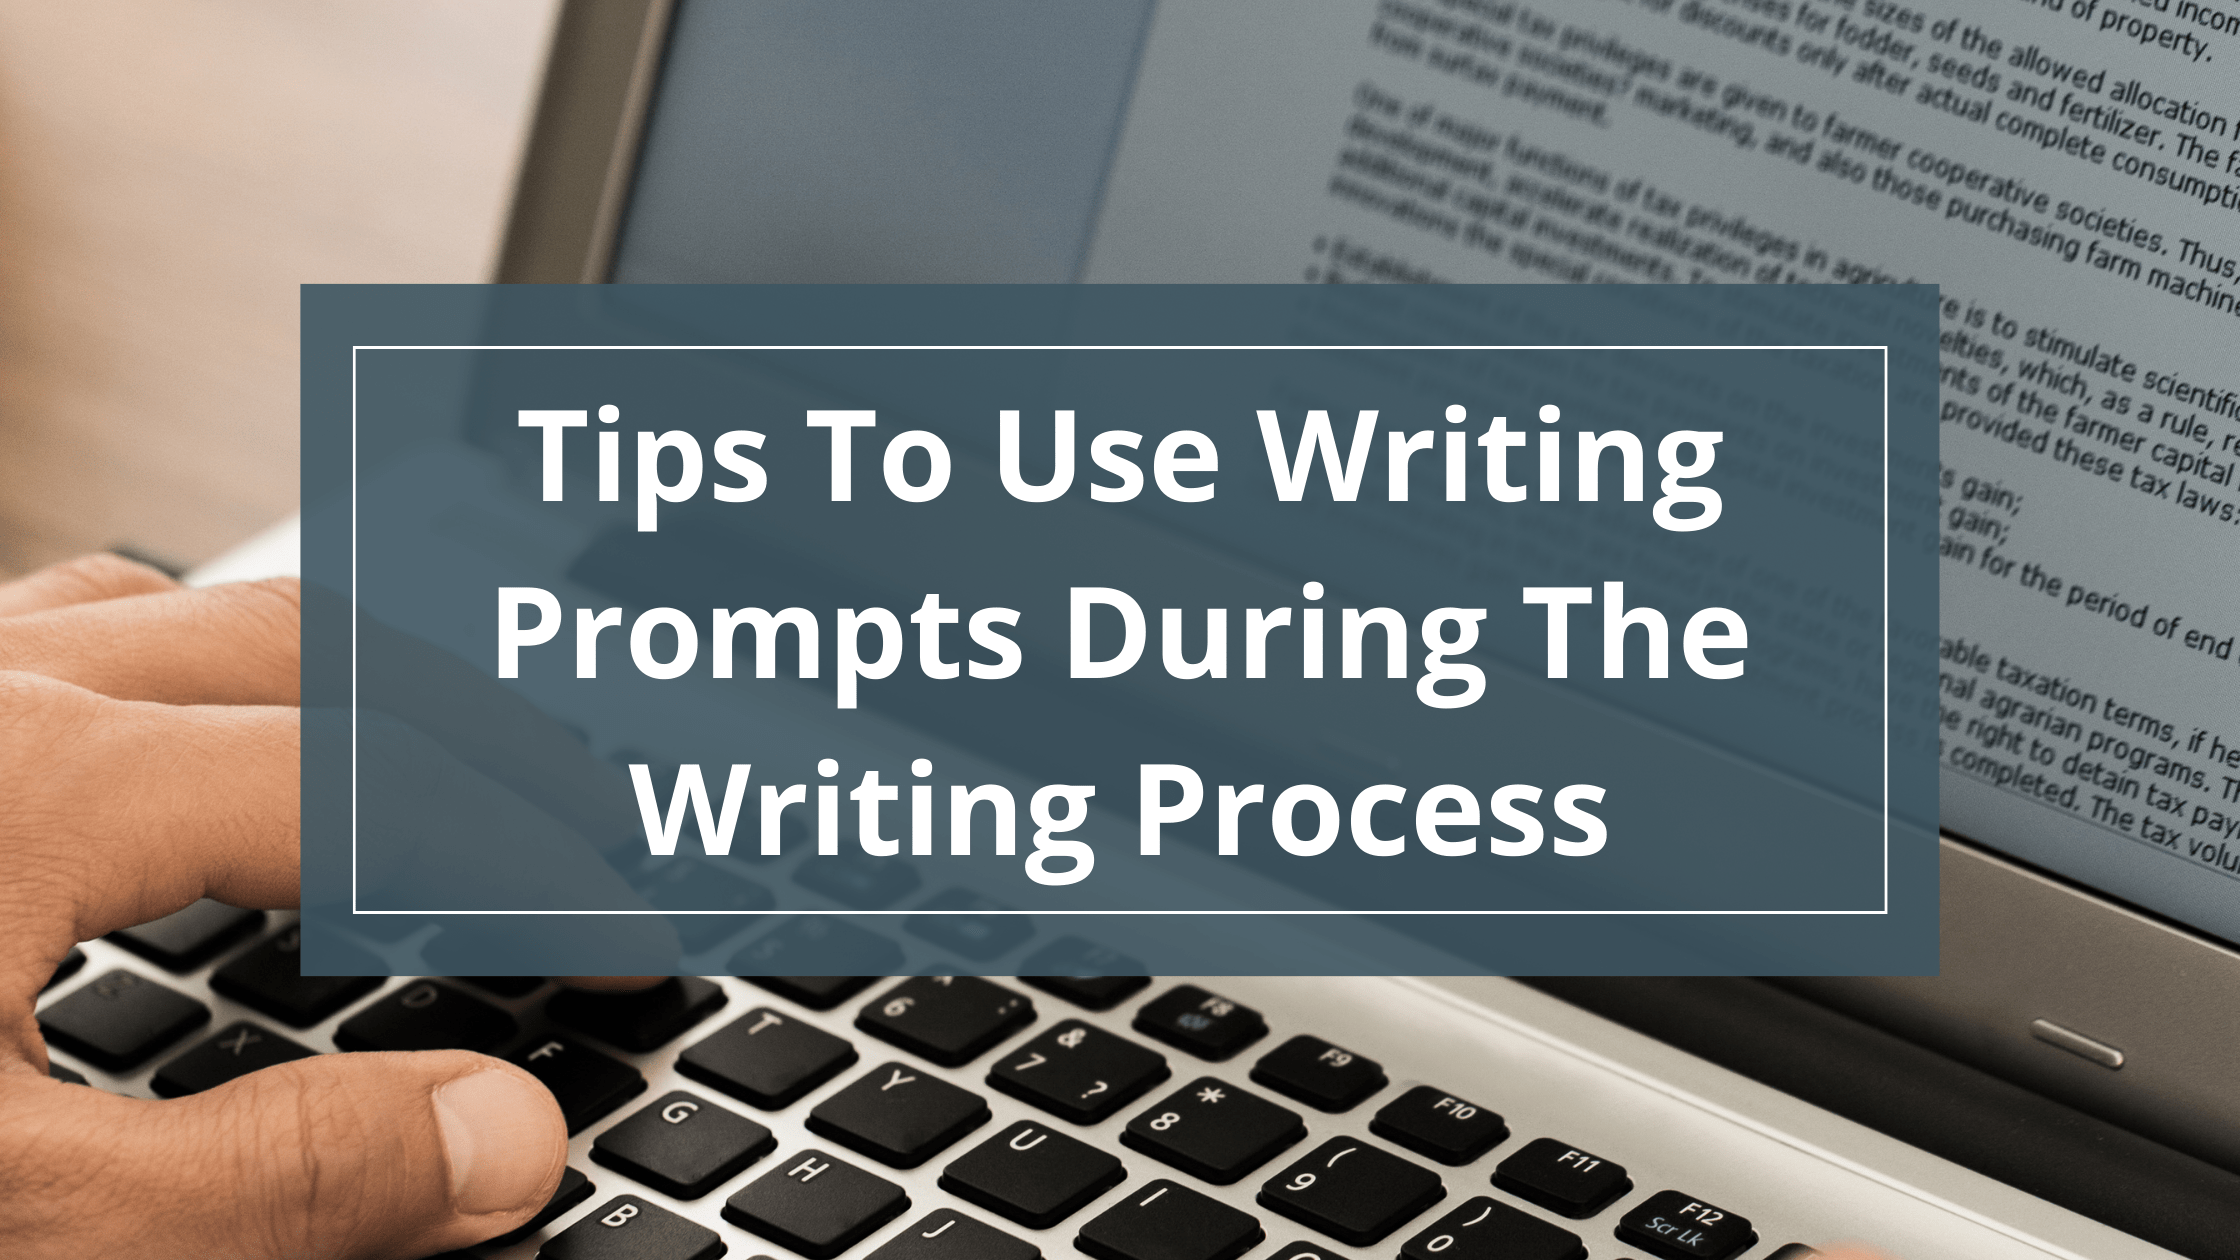 Why You Should Use Writing Prompts During The Writing Process